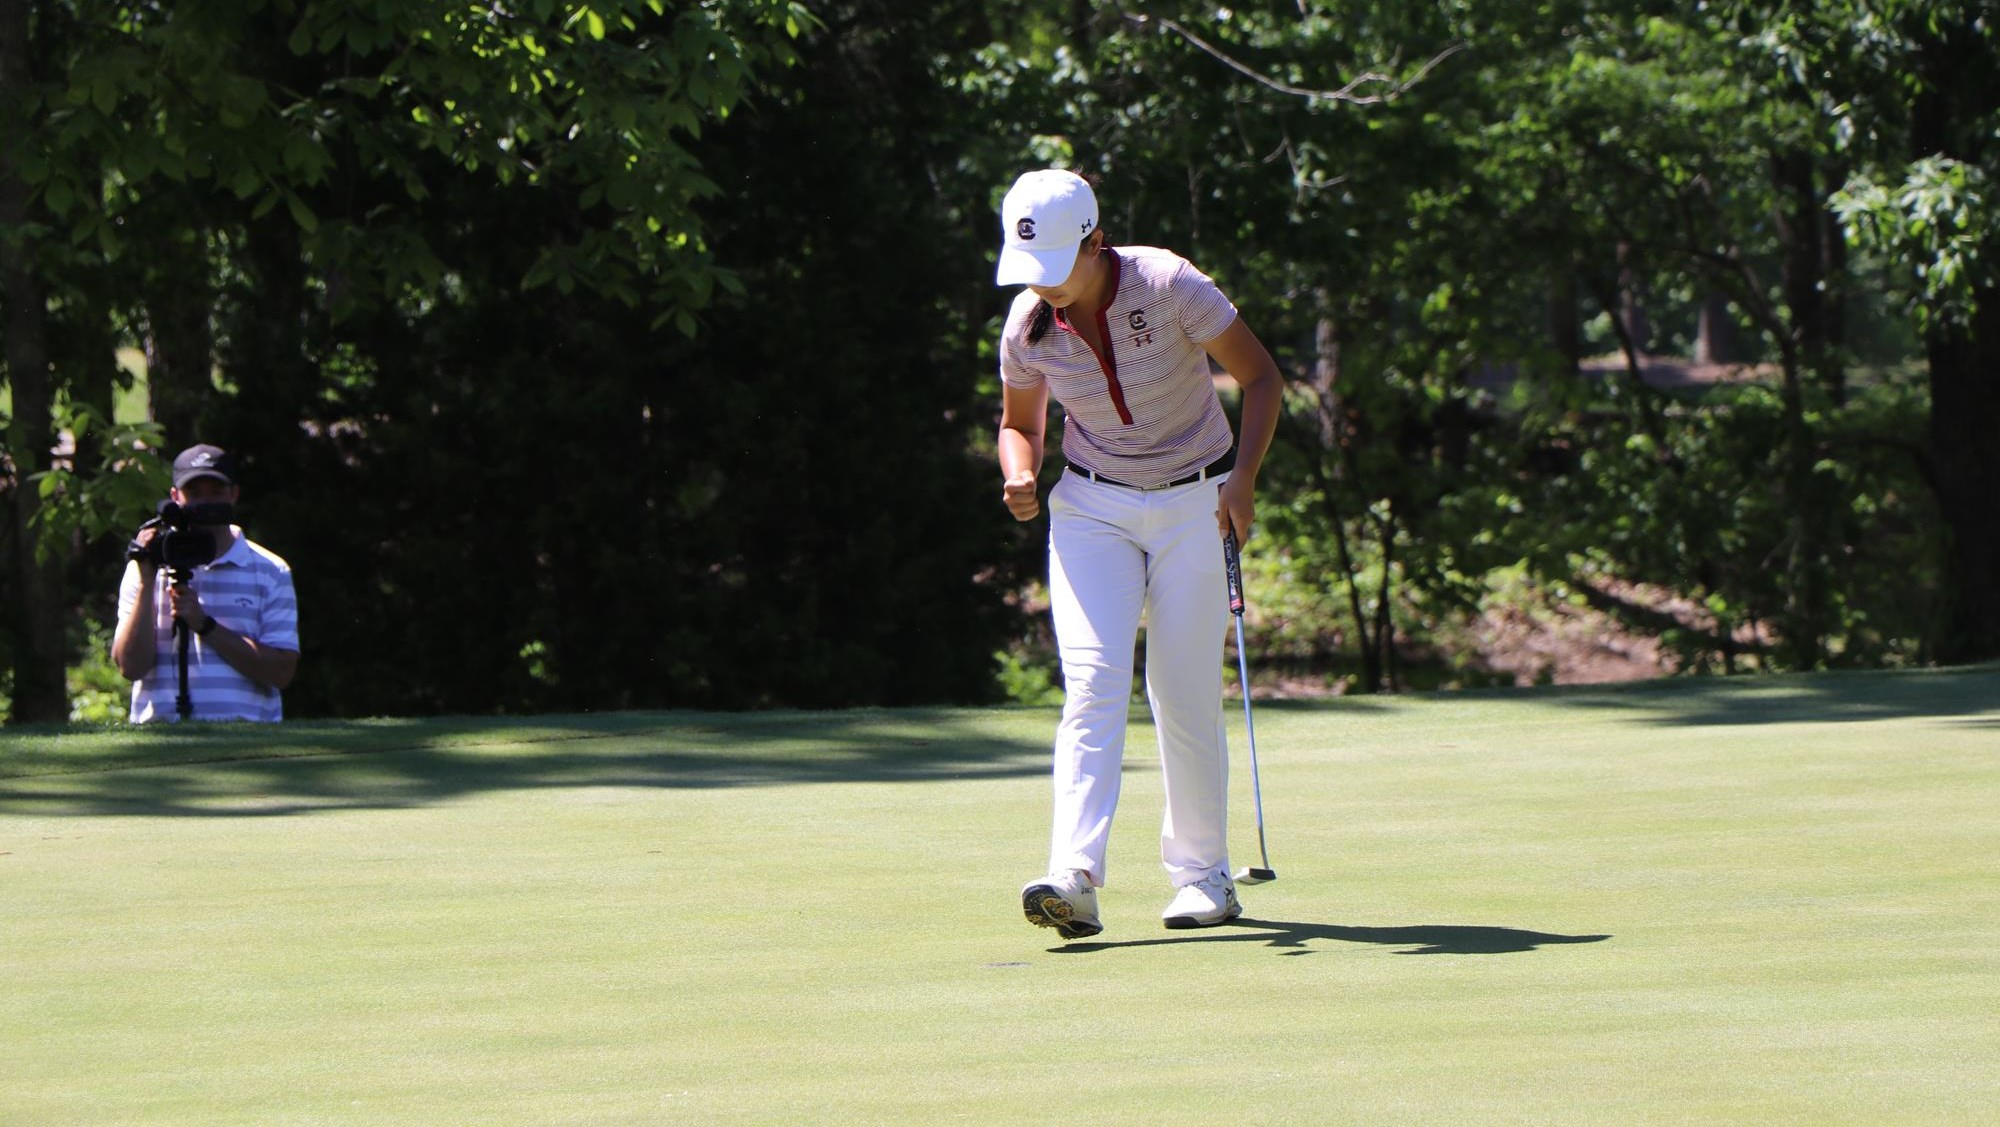 Go, Price Named All-Americans by WGCA